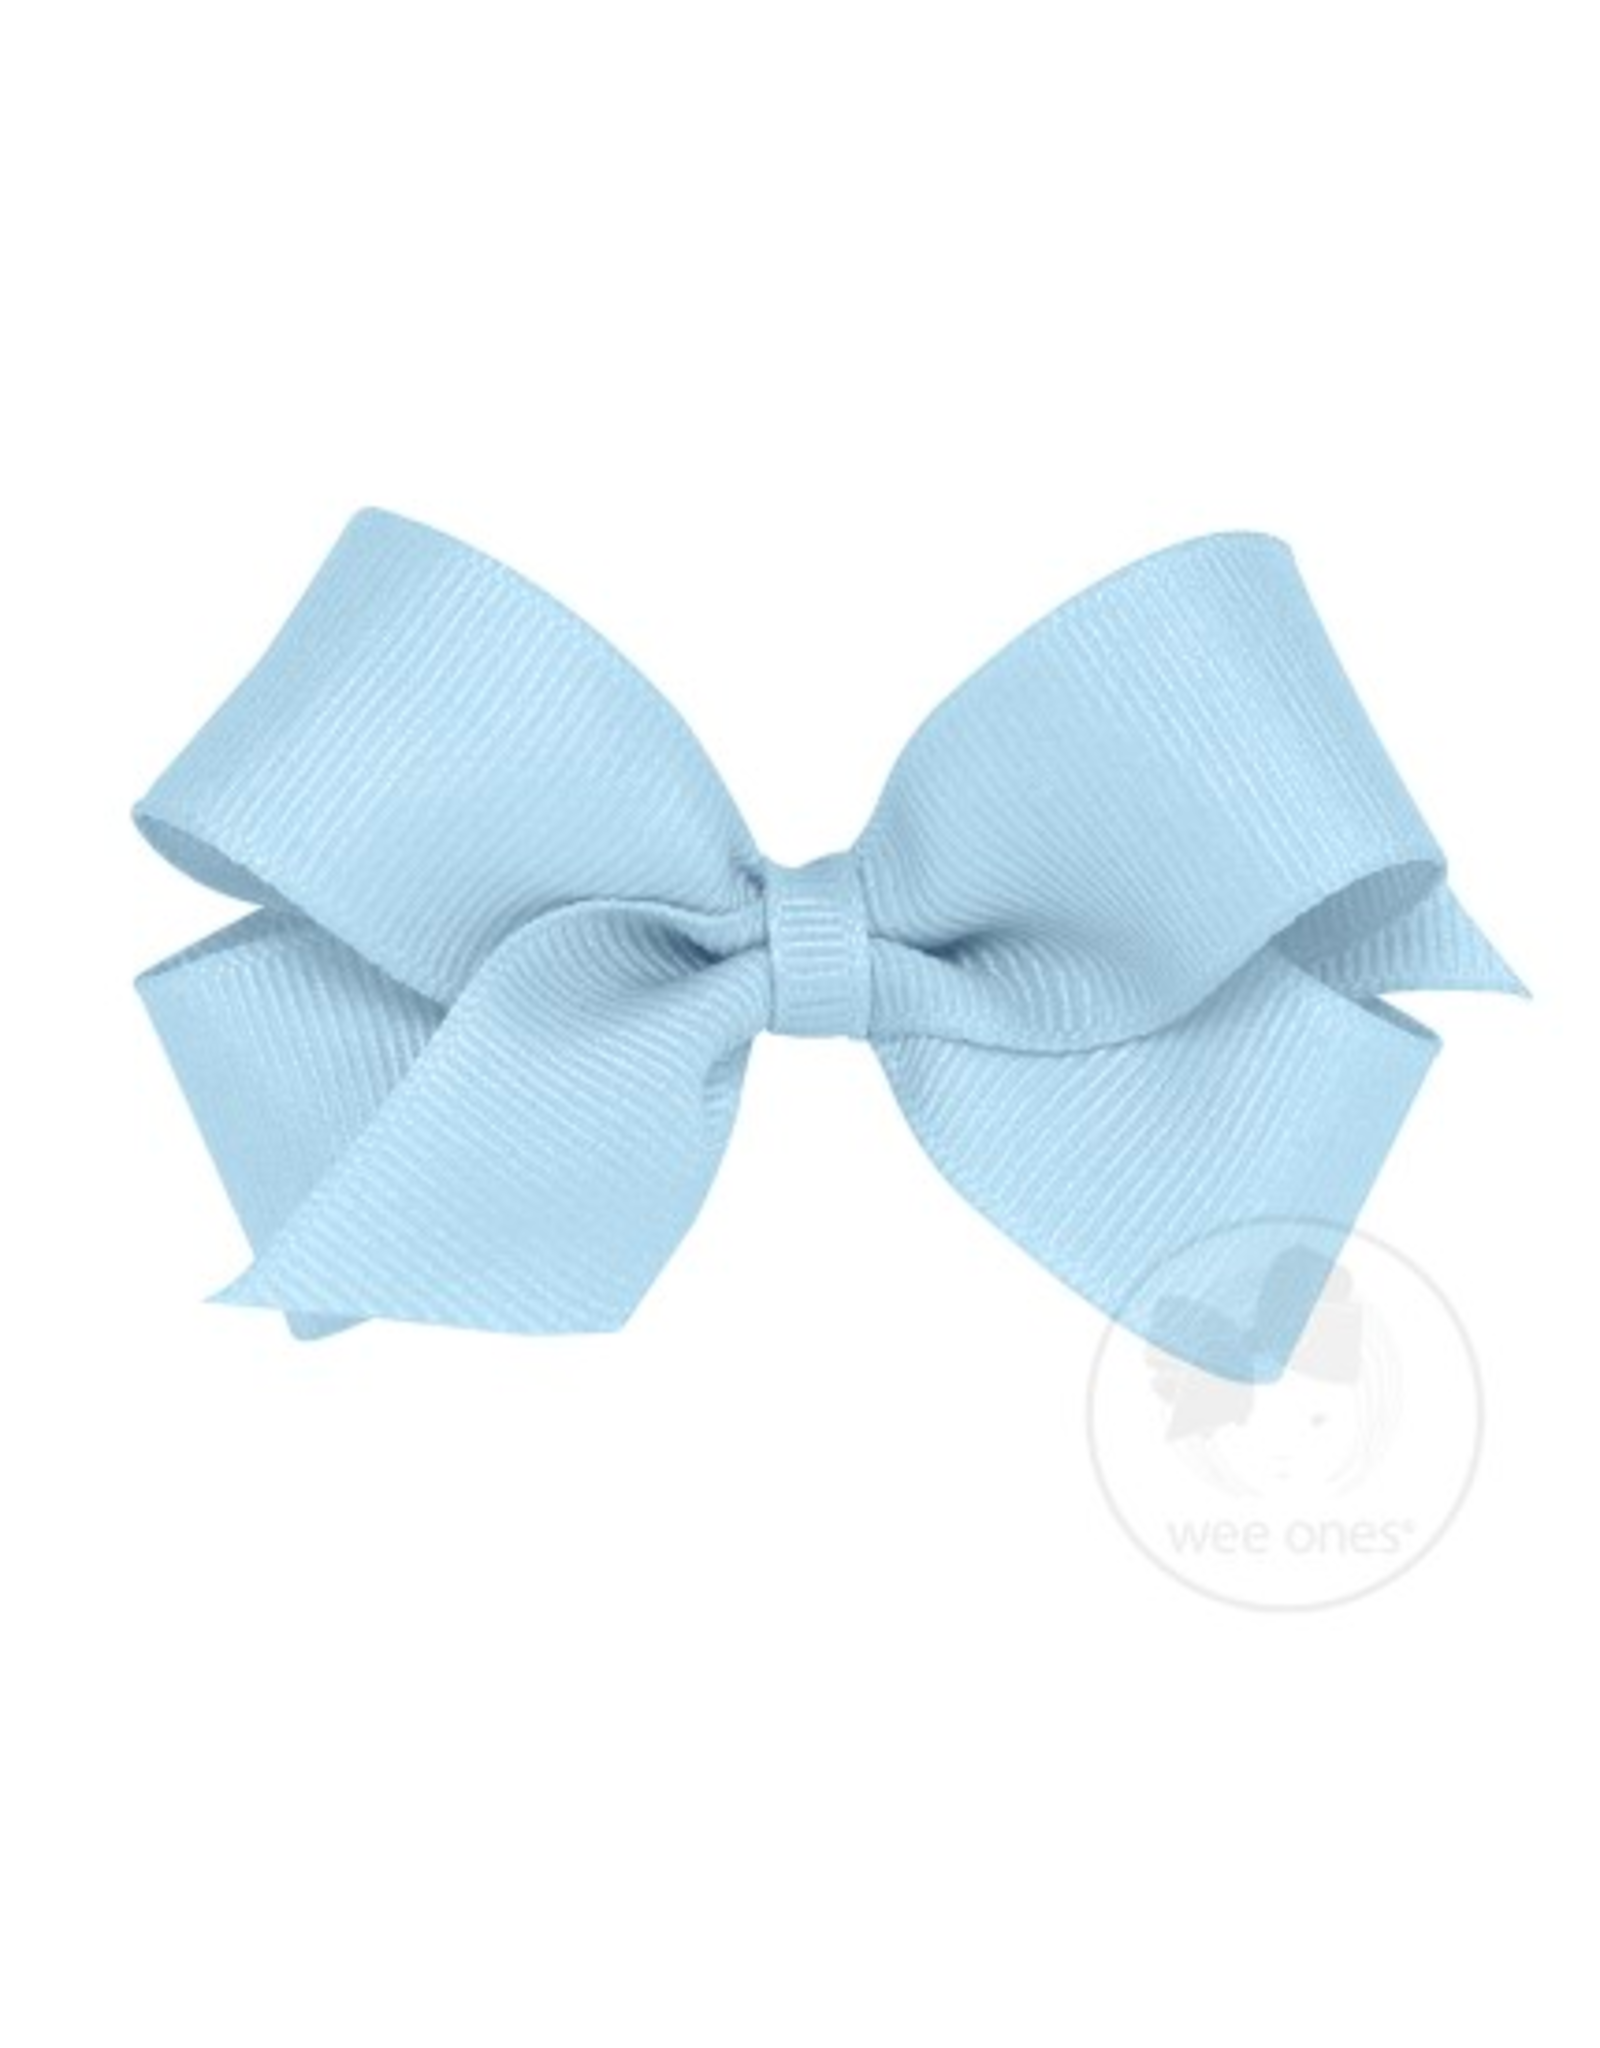 Wee Ones Wee Ones Mini Bow in Light Blue